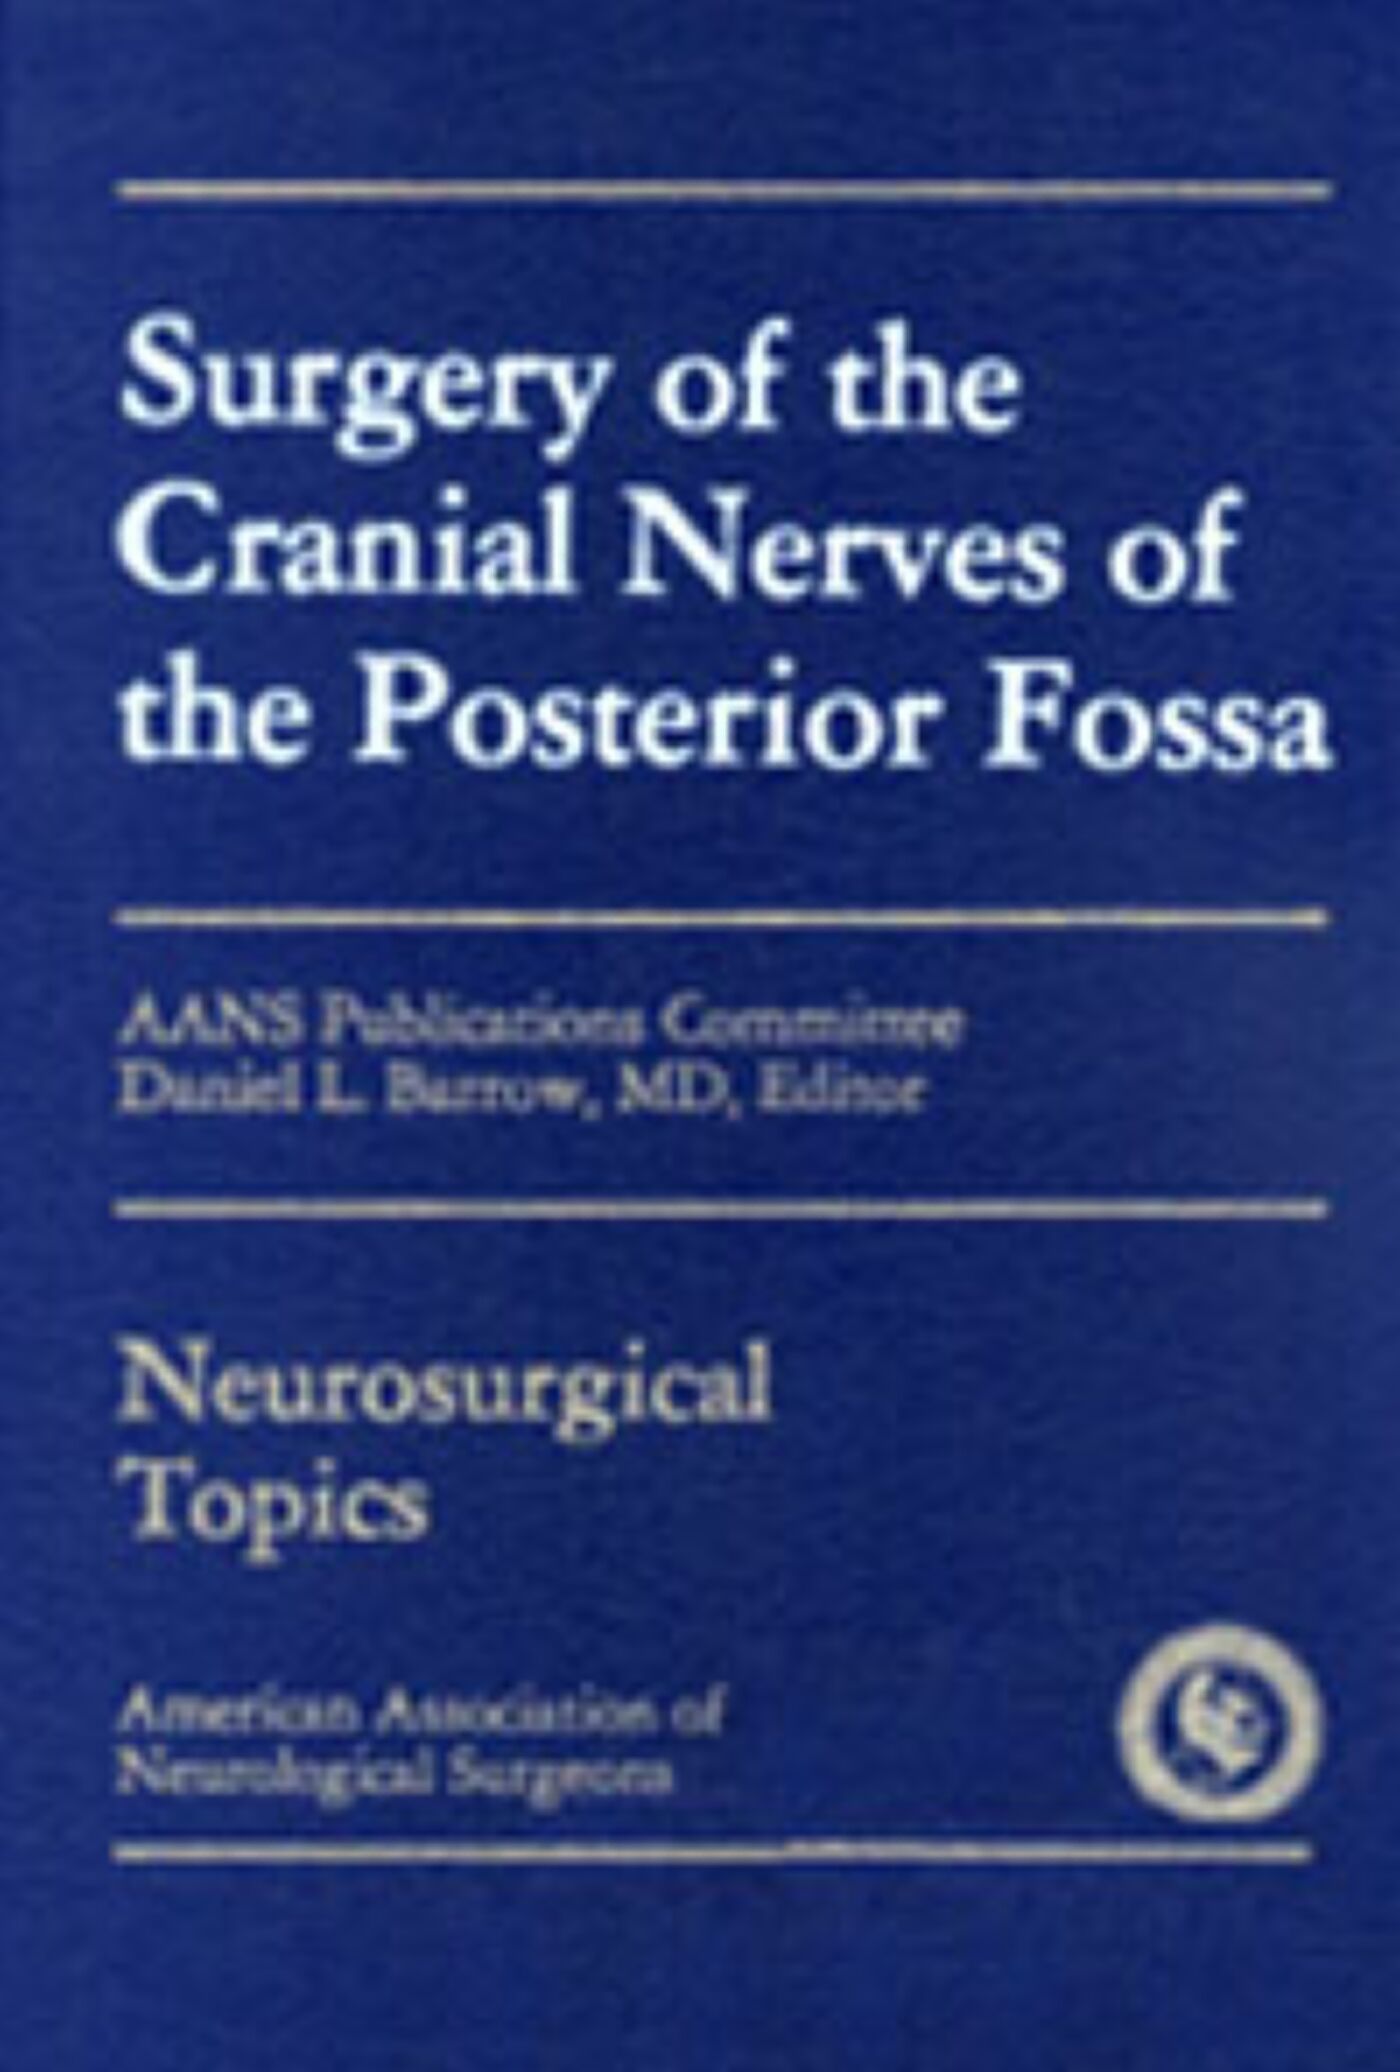 Surgery of the Cranial Nerves of the Posterior Fossa, 9781588901347